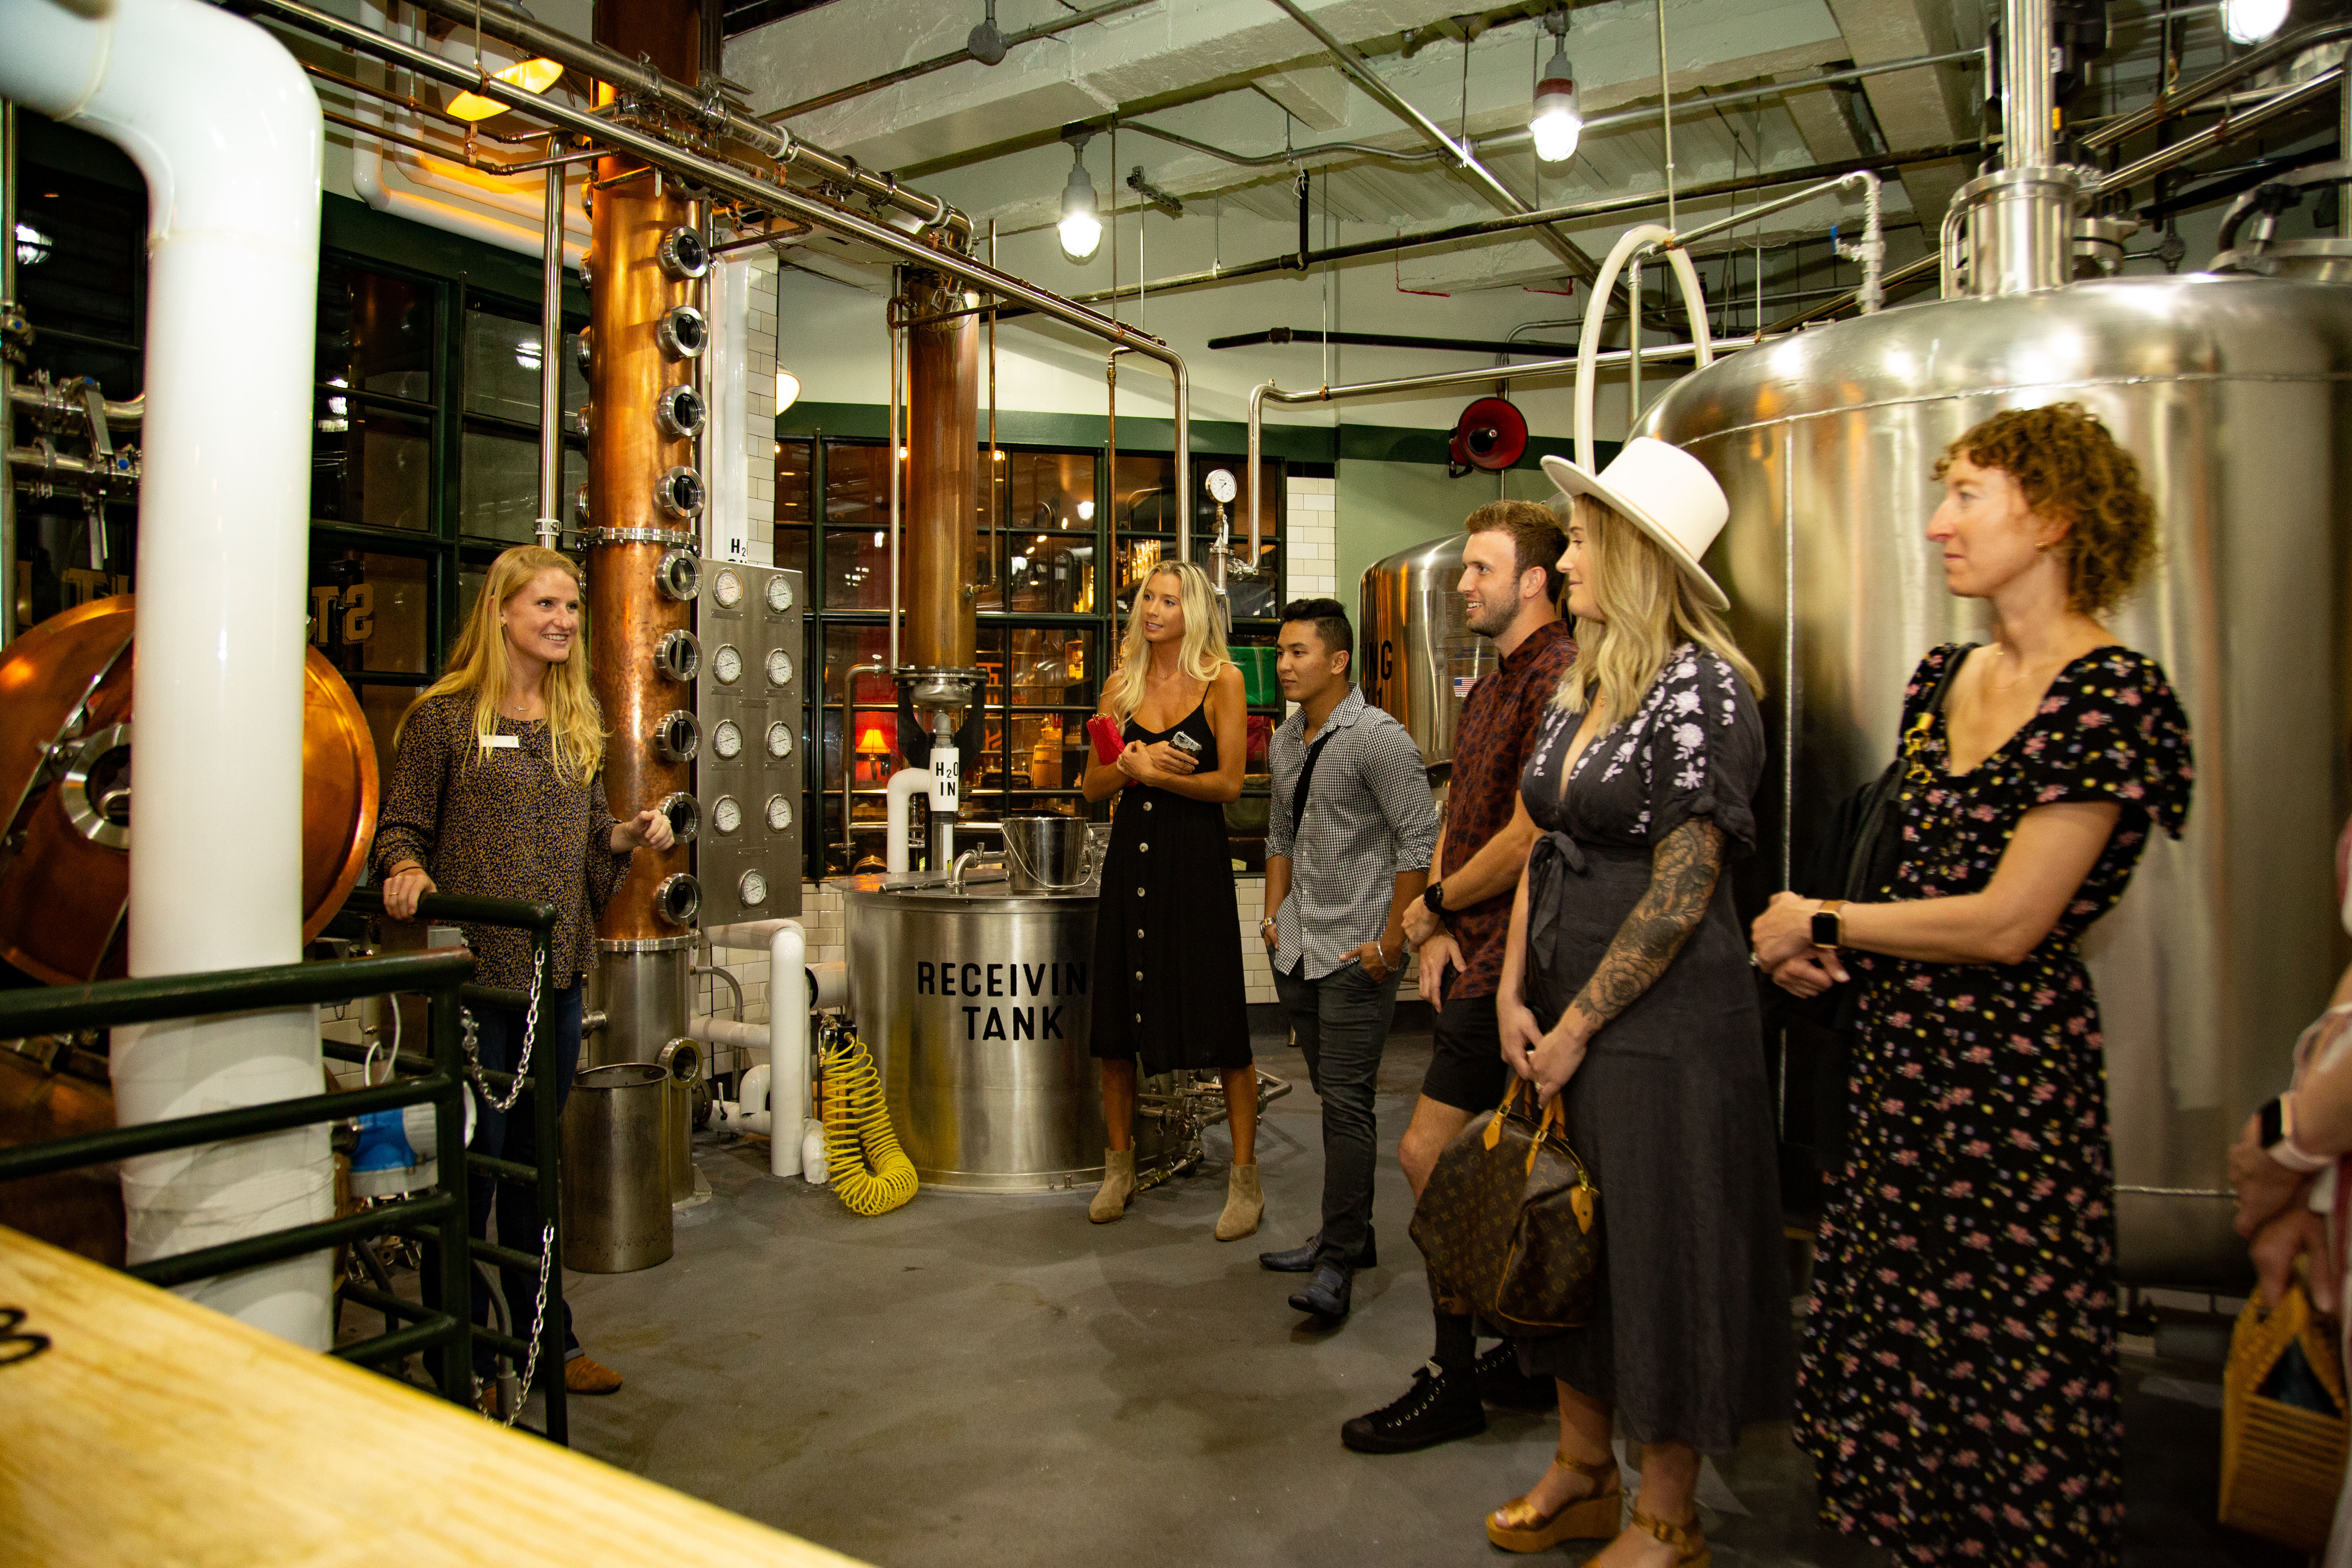 Group at a tour of brewery